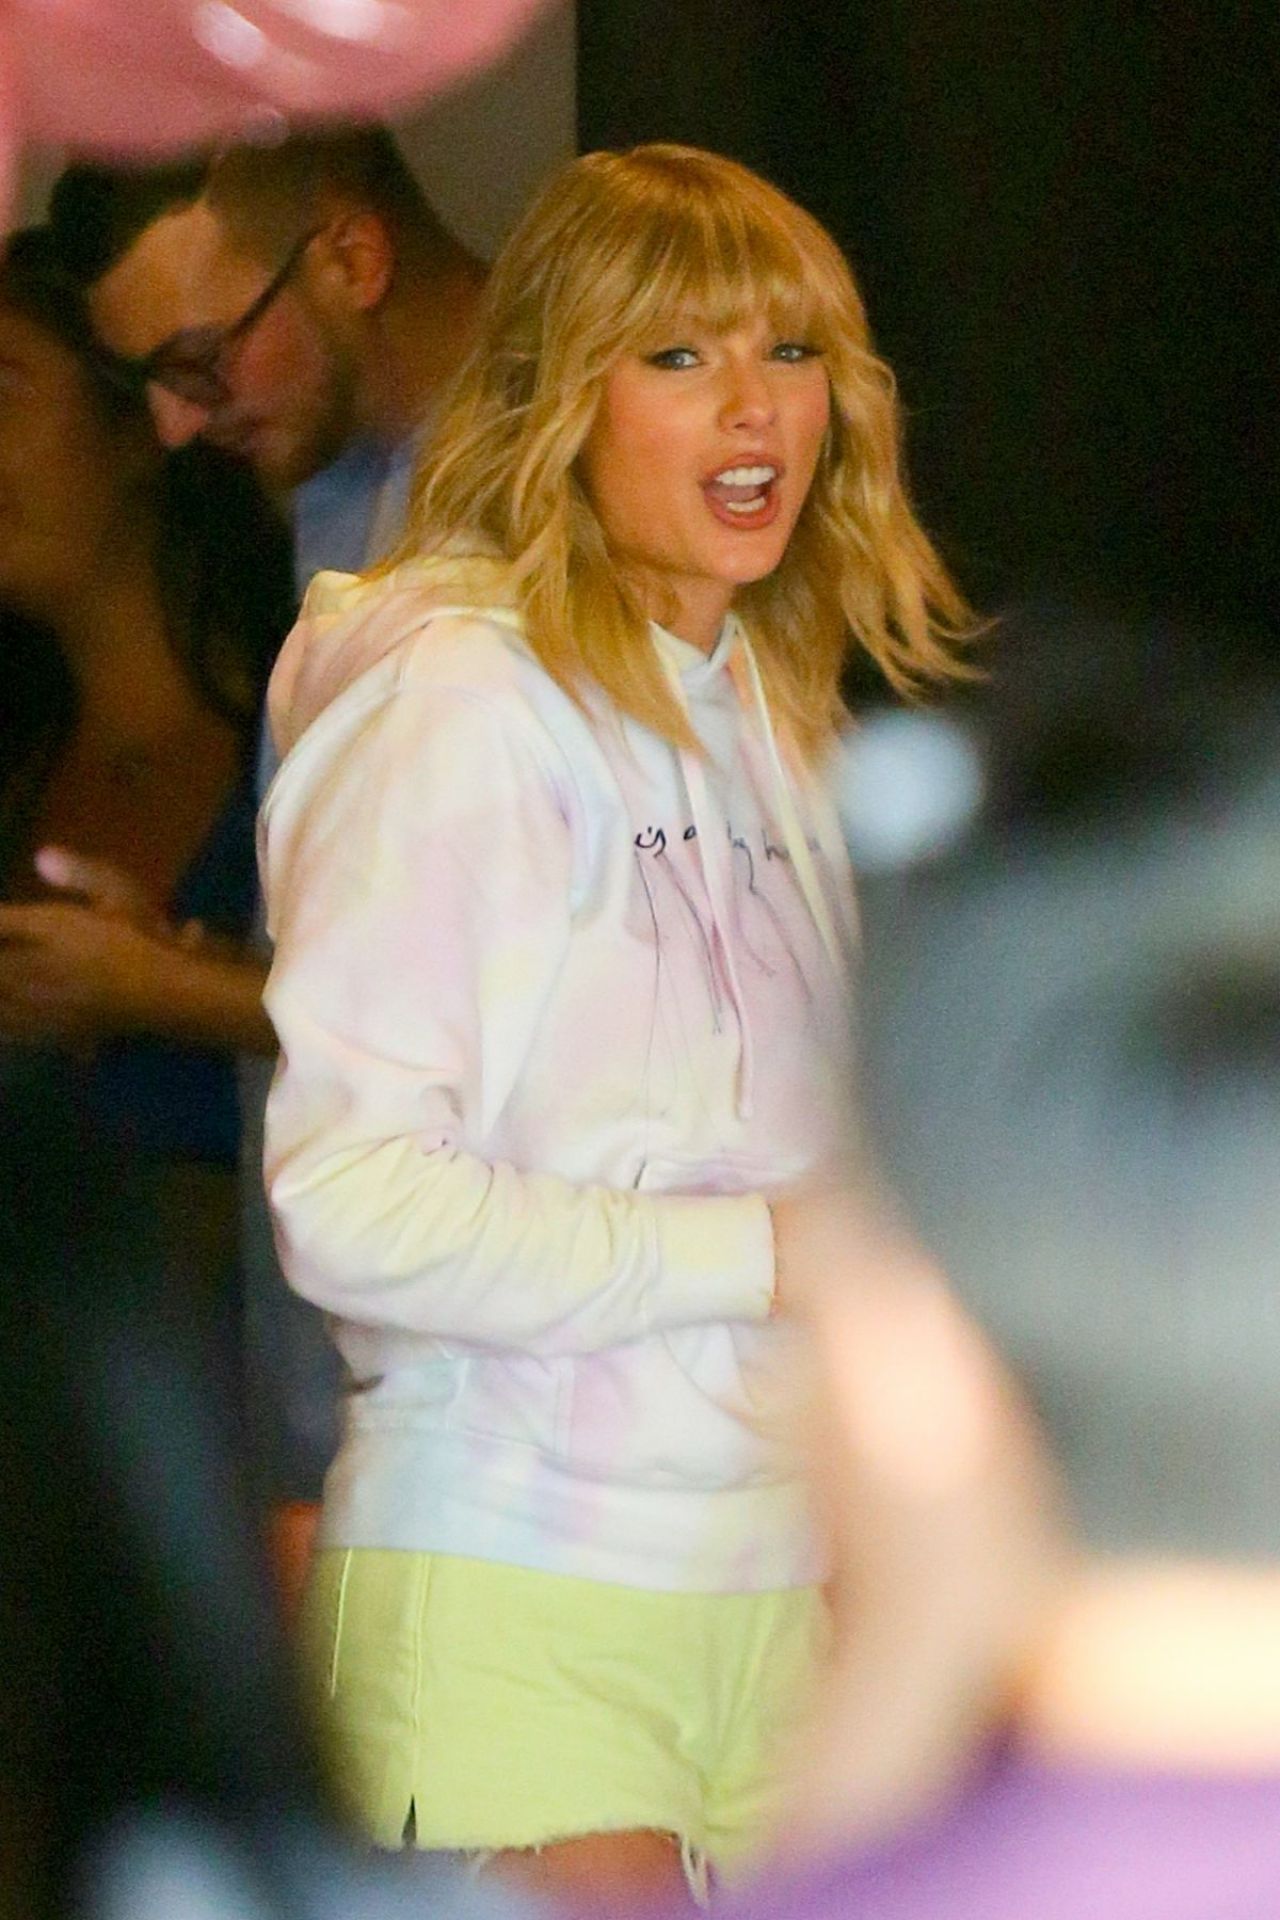 Casual Taylor Swift at her pop up shop in New York City